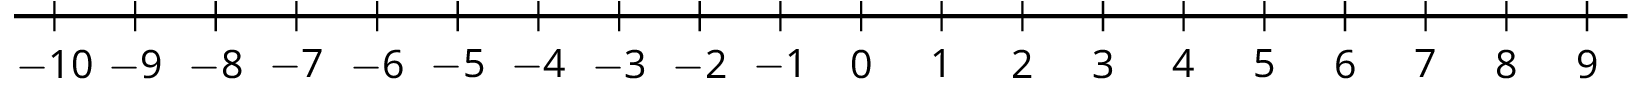 A number line with the numbers negative 10 through 9 indicated.